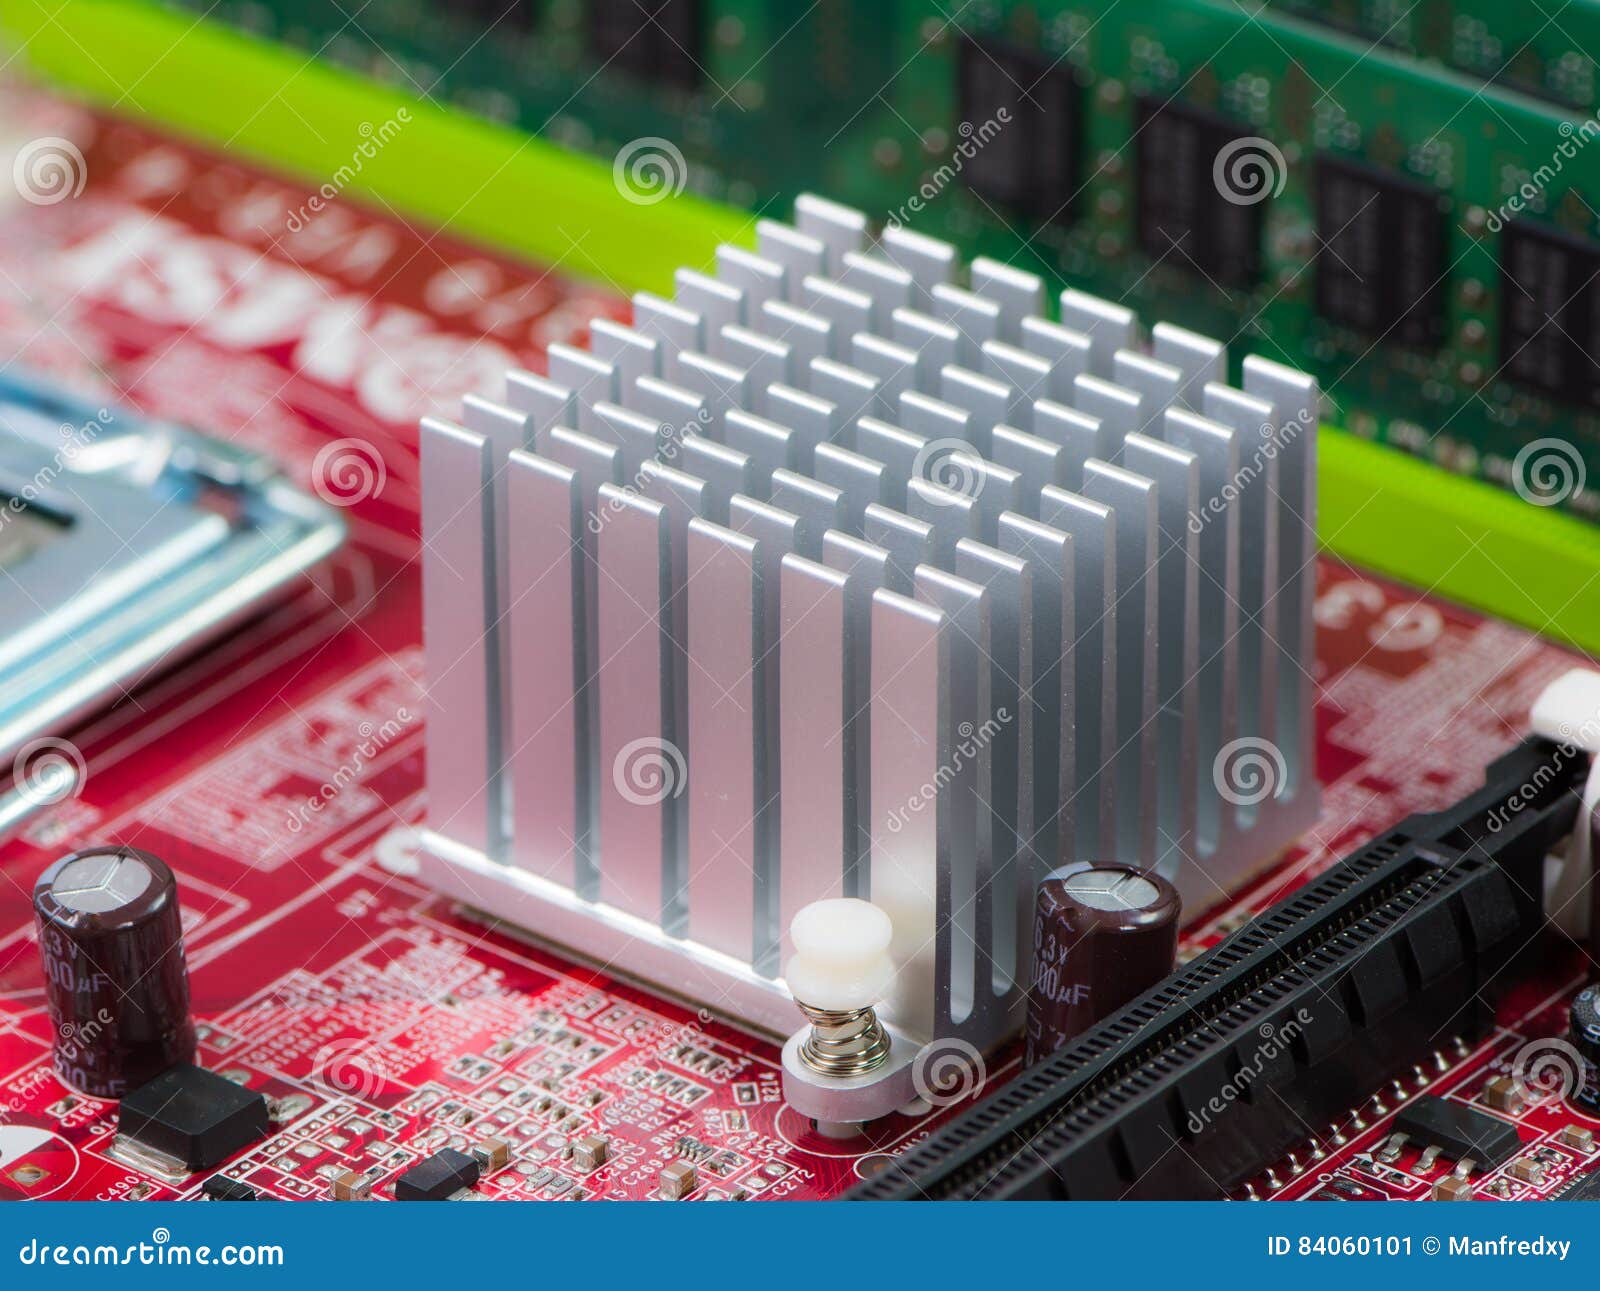 Heat Sink On A Computer Motherboard Stock Image Image Of